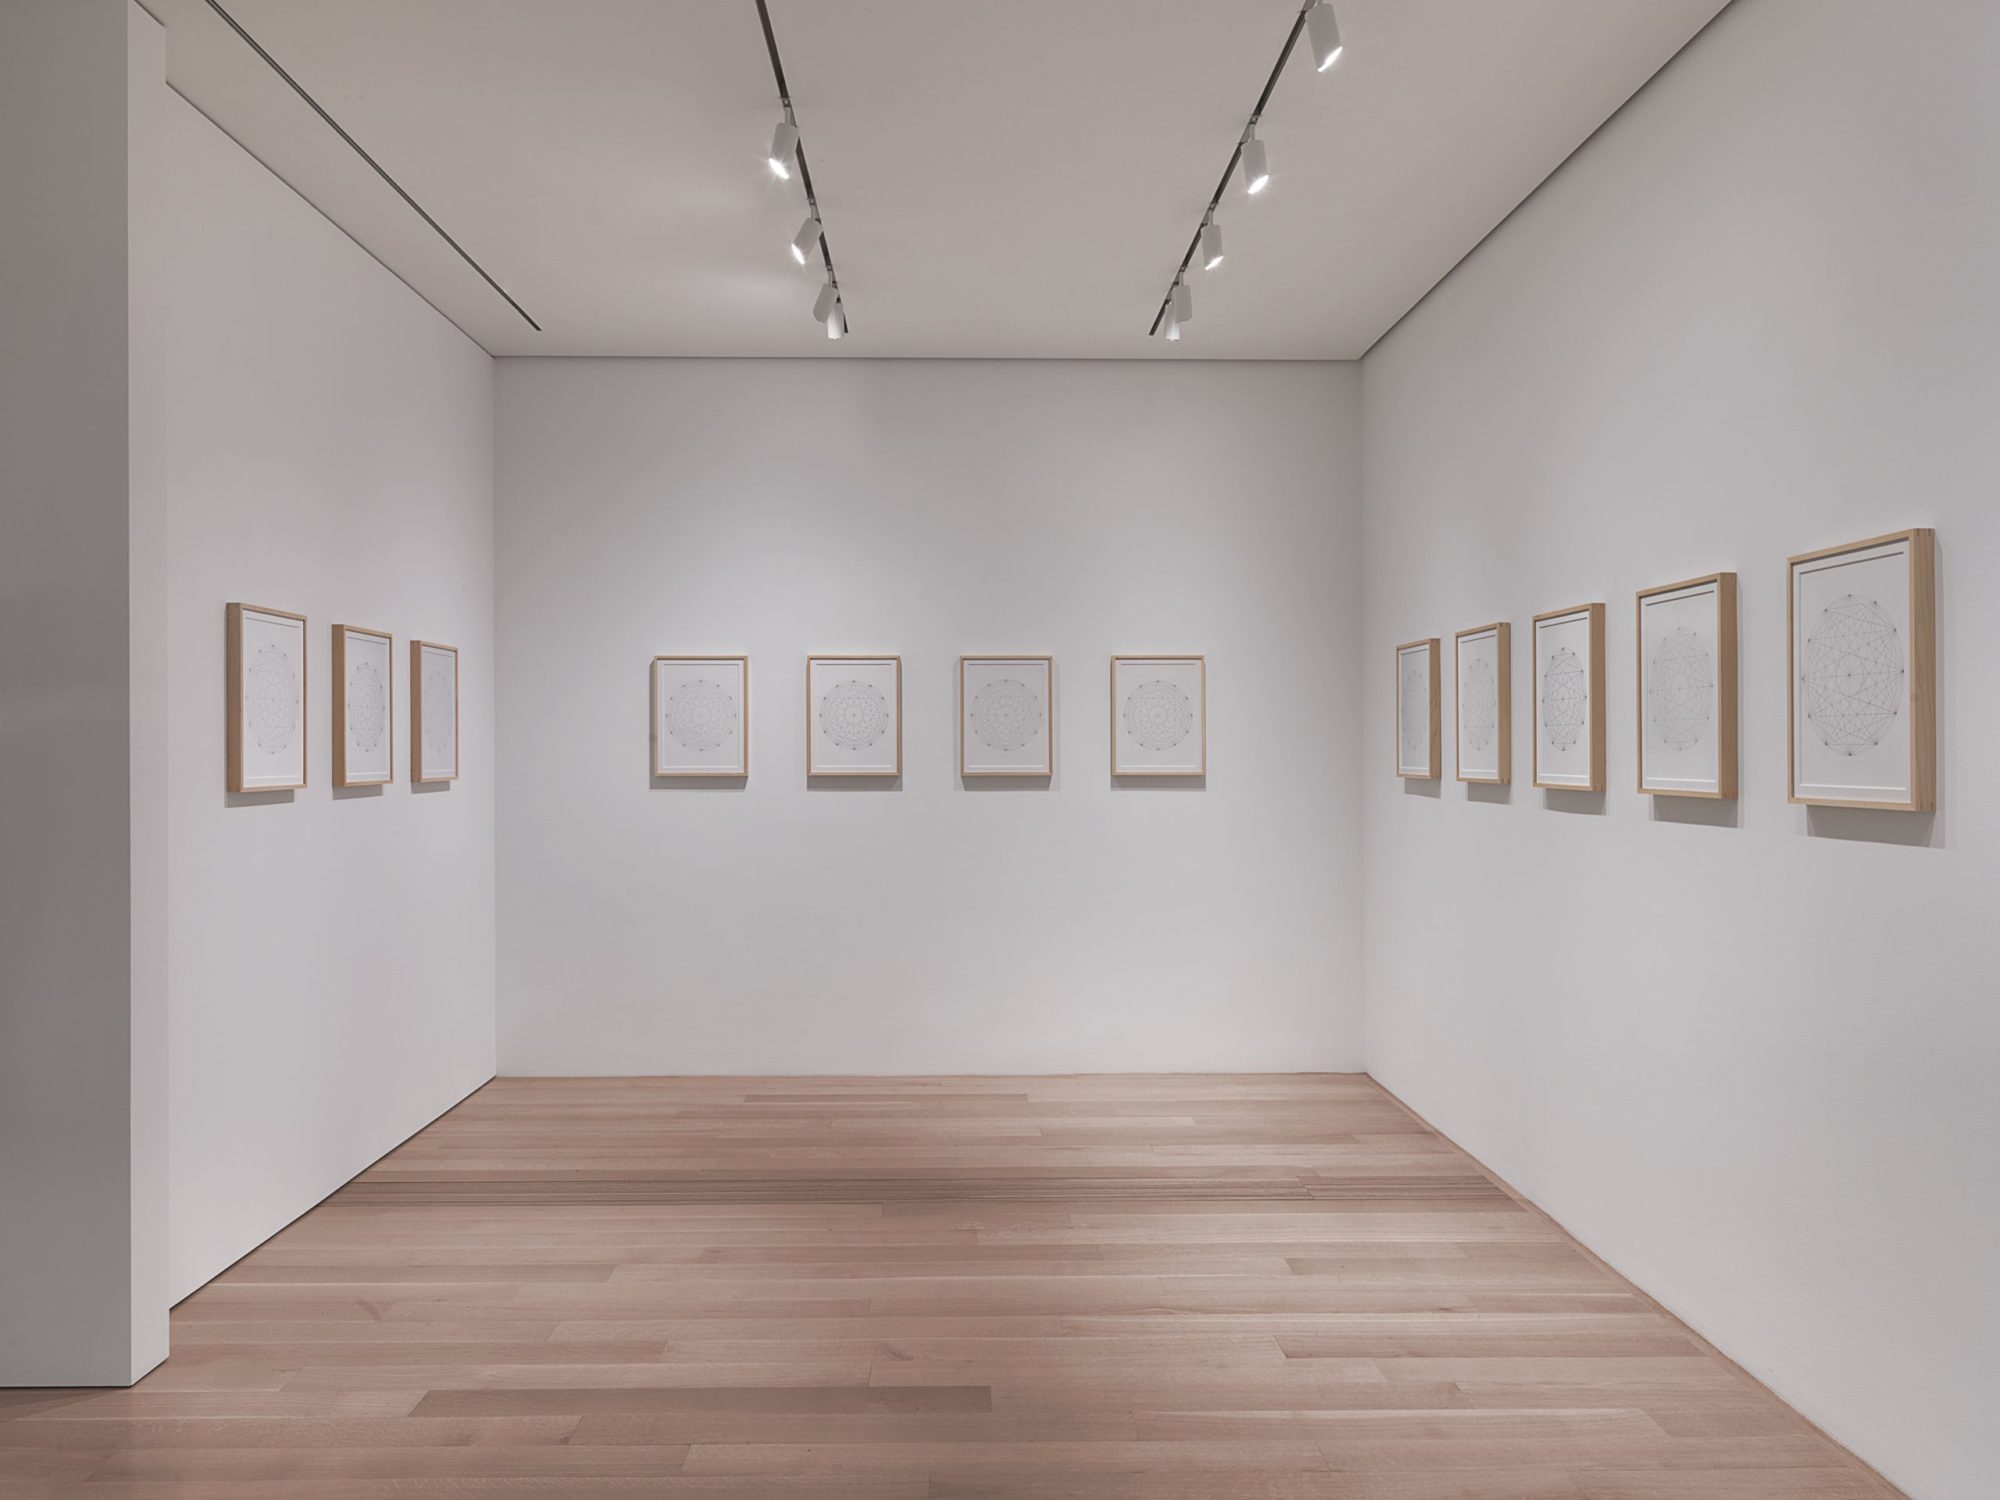 An open atrium lit by two rows of overhead lights in a gallery, with three separate walls each with framed drawings of depicting circles. The center front-facing wall has four separate framed images. On the left wall there are three images in the same fashion, and on the right wall there are five. All equally spaced out on al three walls.